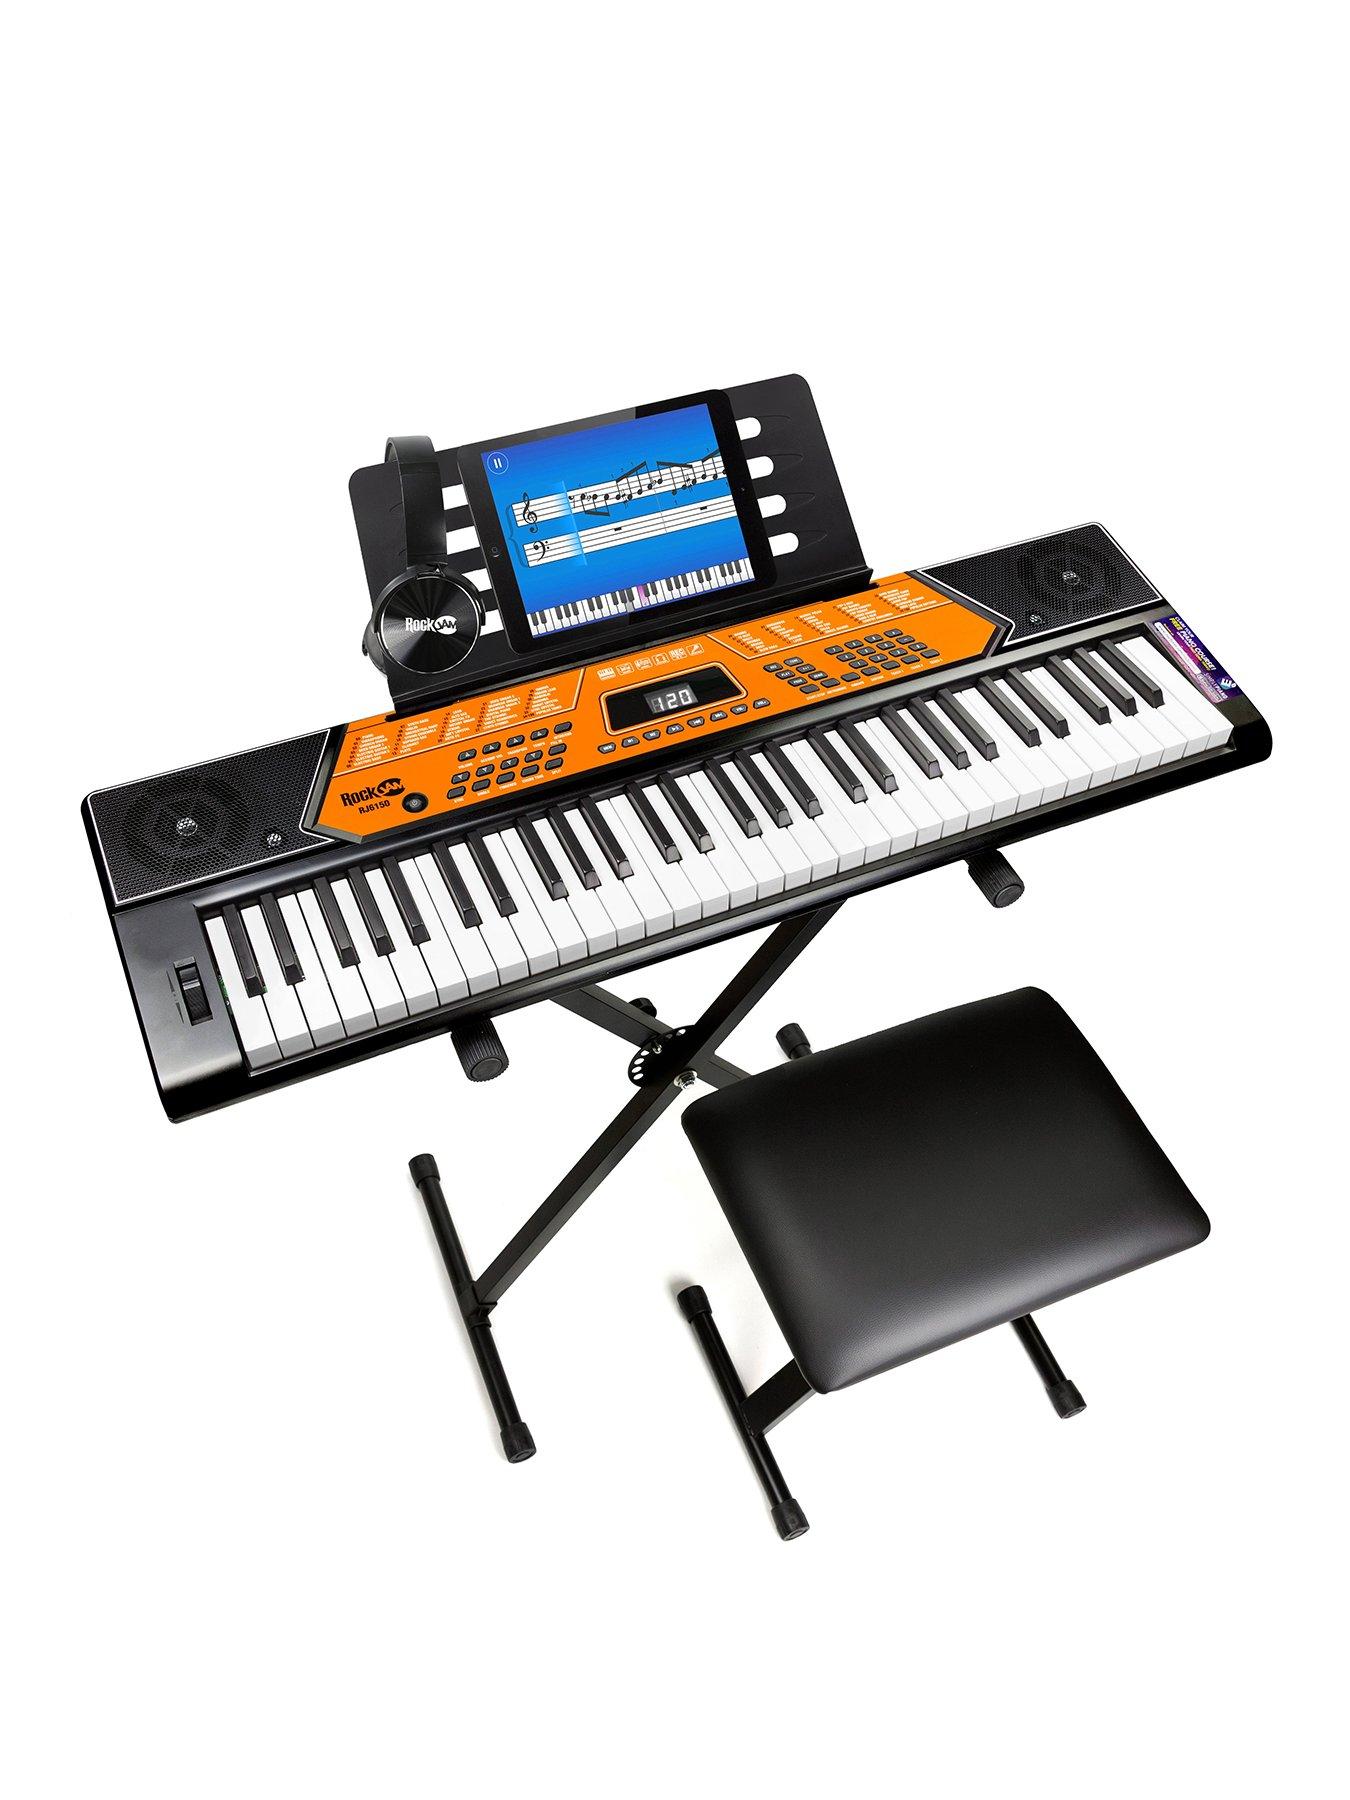 88 Key Electric Keyboard Piano for Beginner/Adults with Padded Piano Bench+Music Stand+Power Adapter+3-Pedal Board+Instruction Book+Headphone Jack Black With 2 Person Bench LAGRIMA Digital Piano 